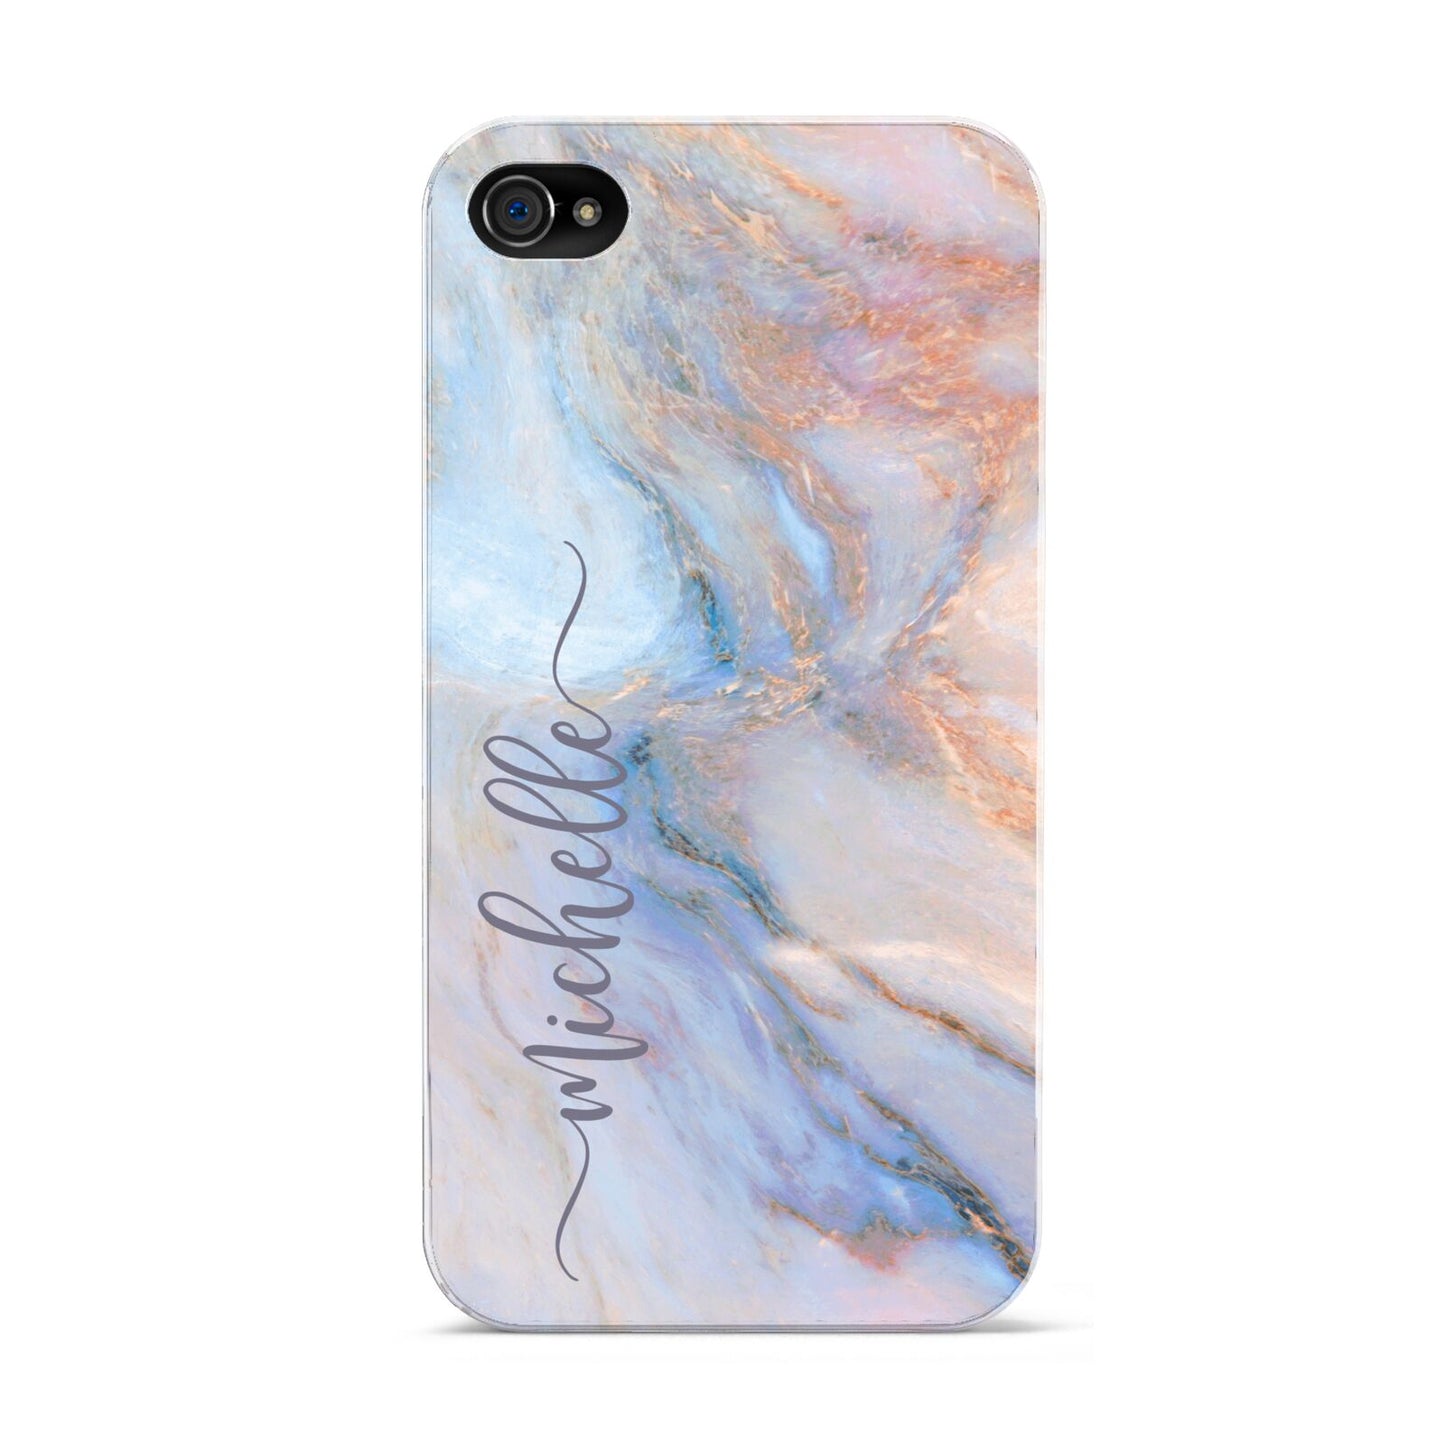 Pale Blue And Pink Marble Apple iPhone 4s Case